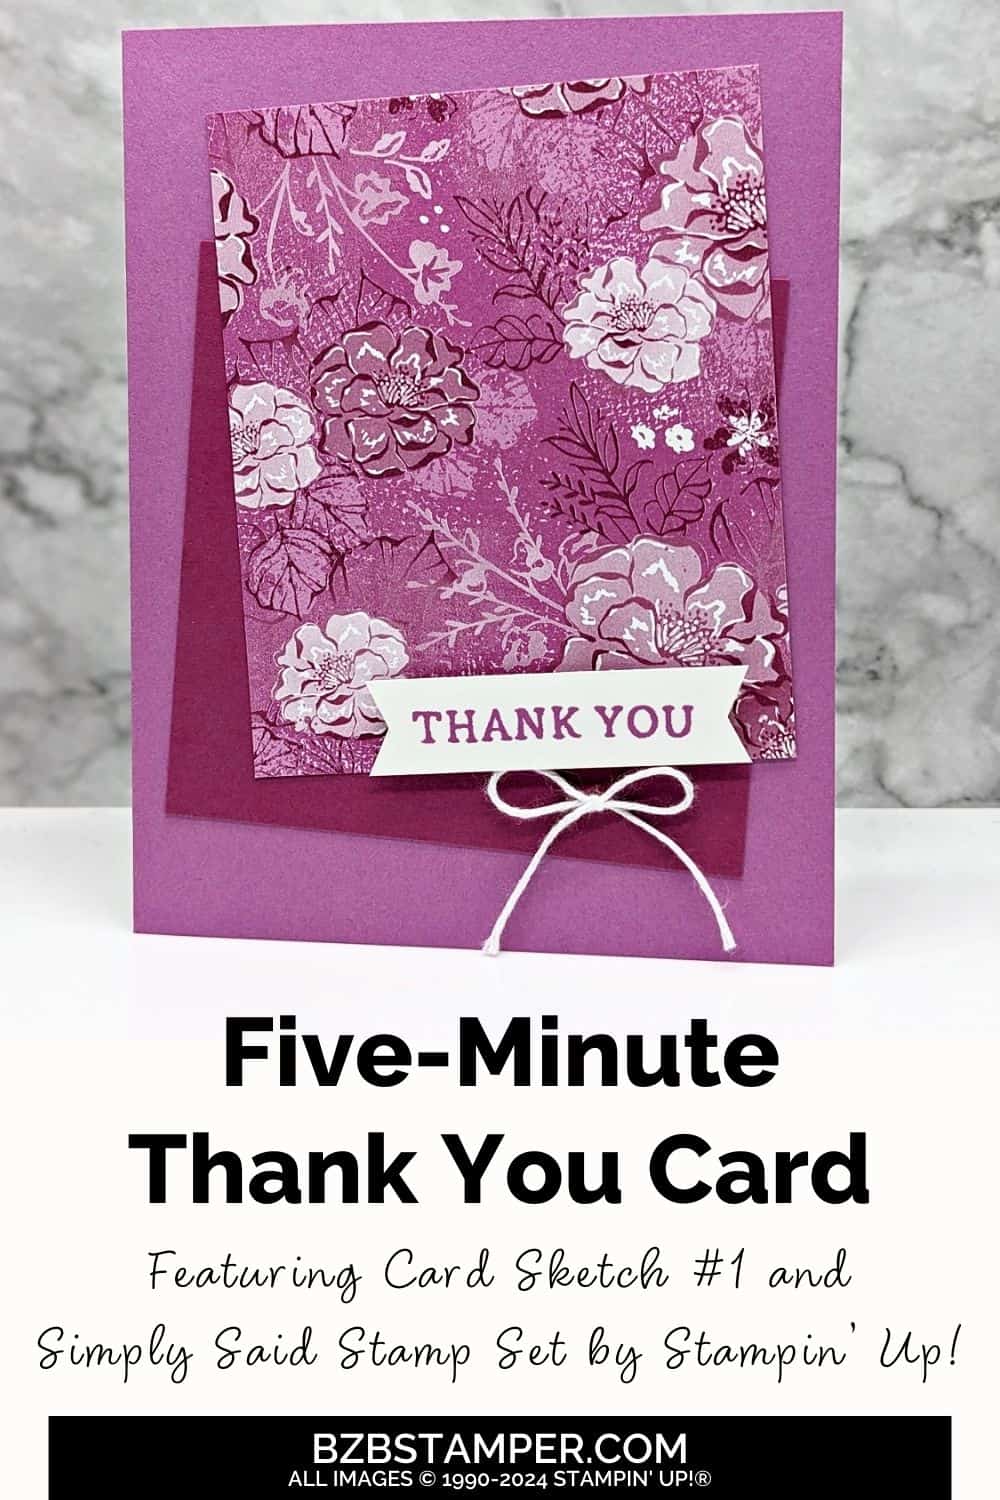 5 Minute Thank You Card Using Card Sketch 1 featuring pretty floral paper in different shades of purple.